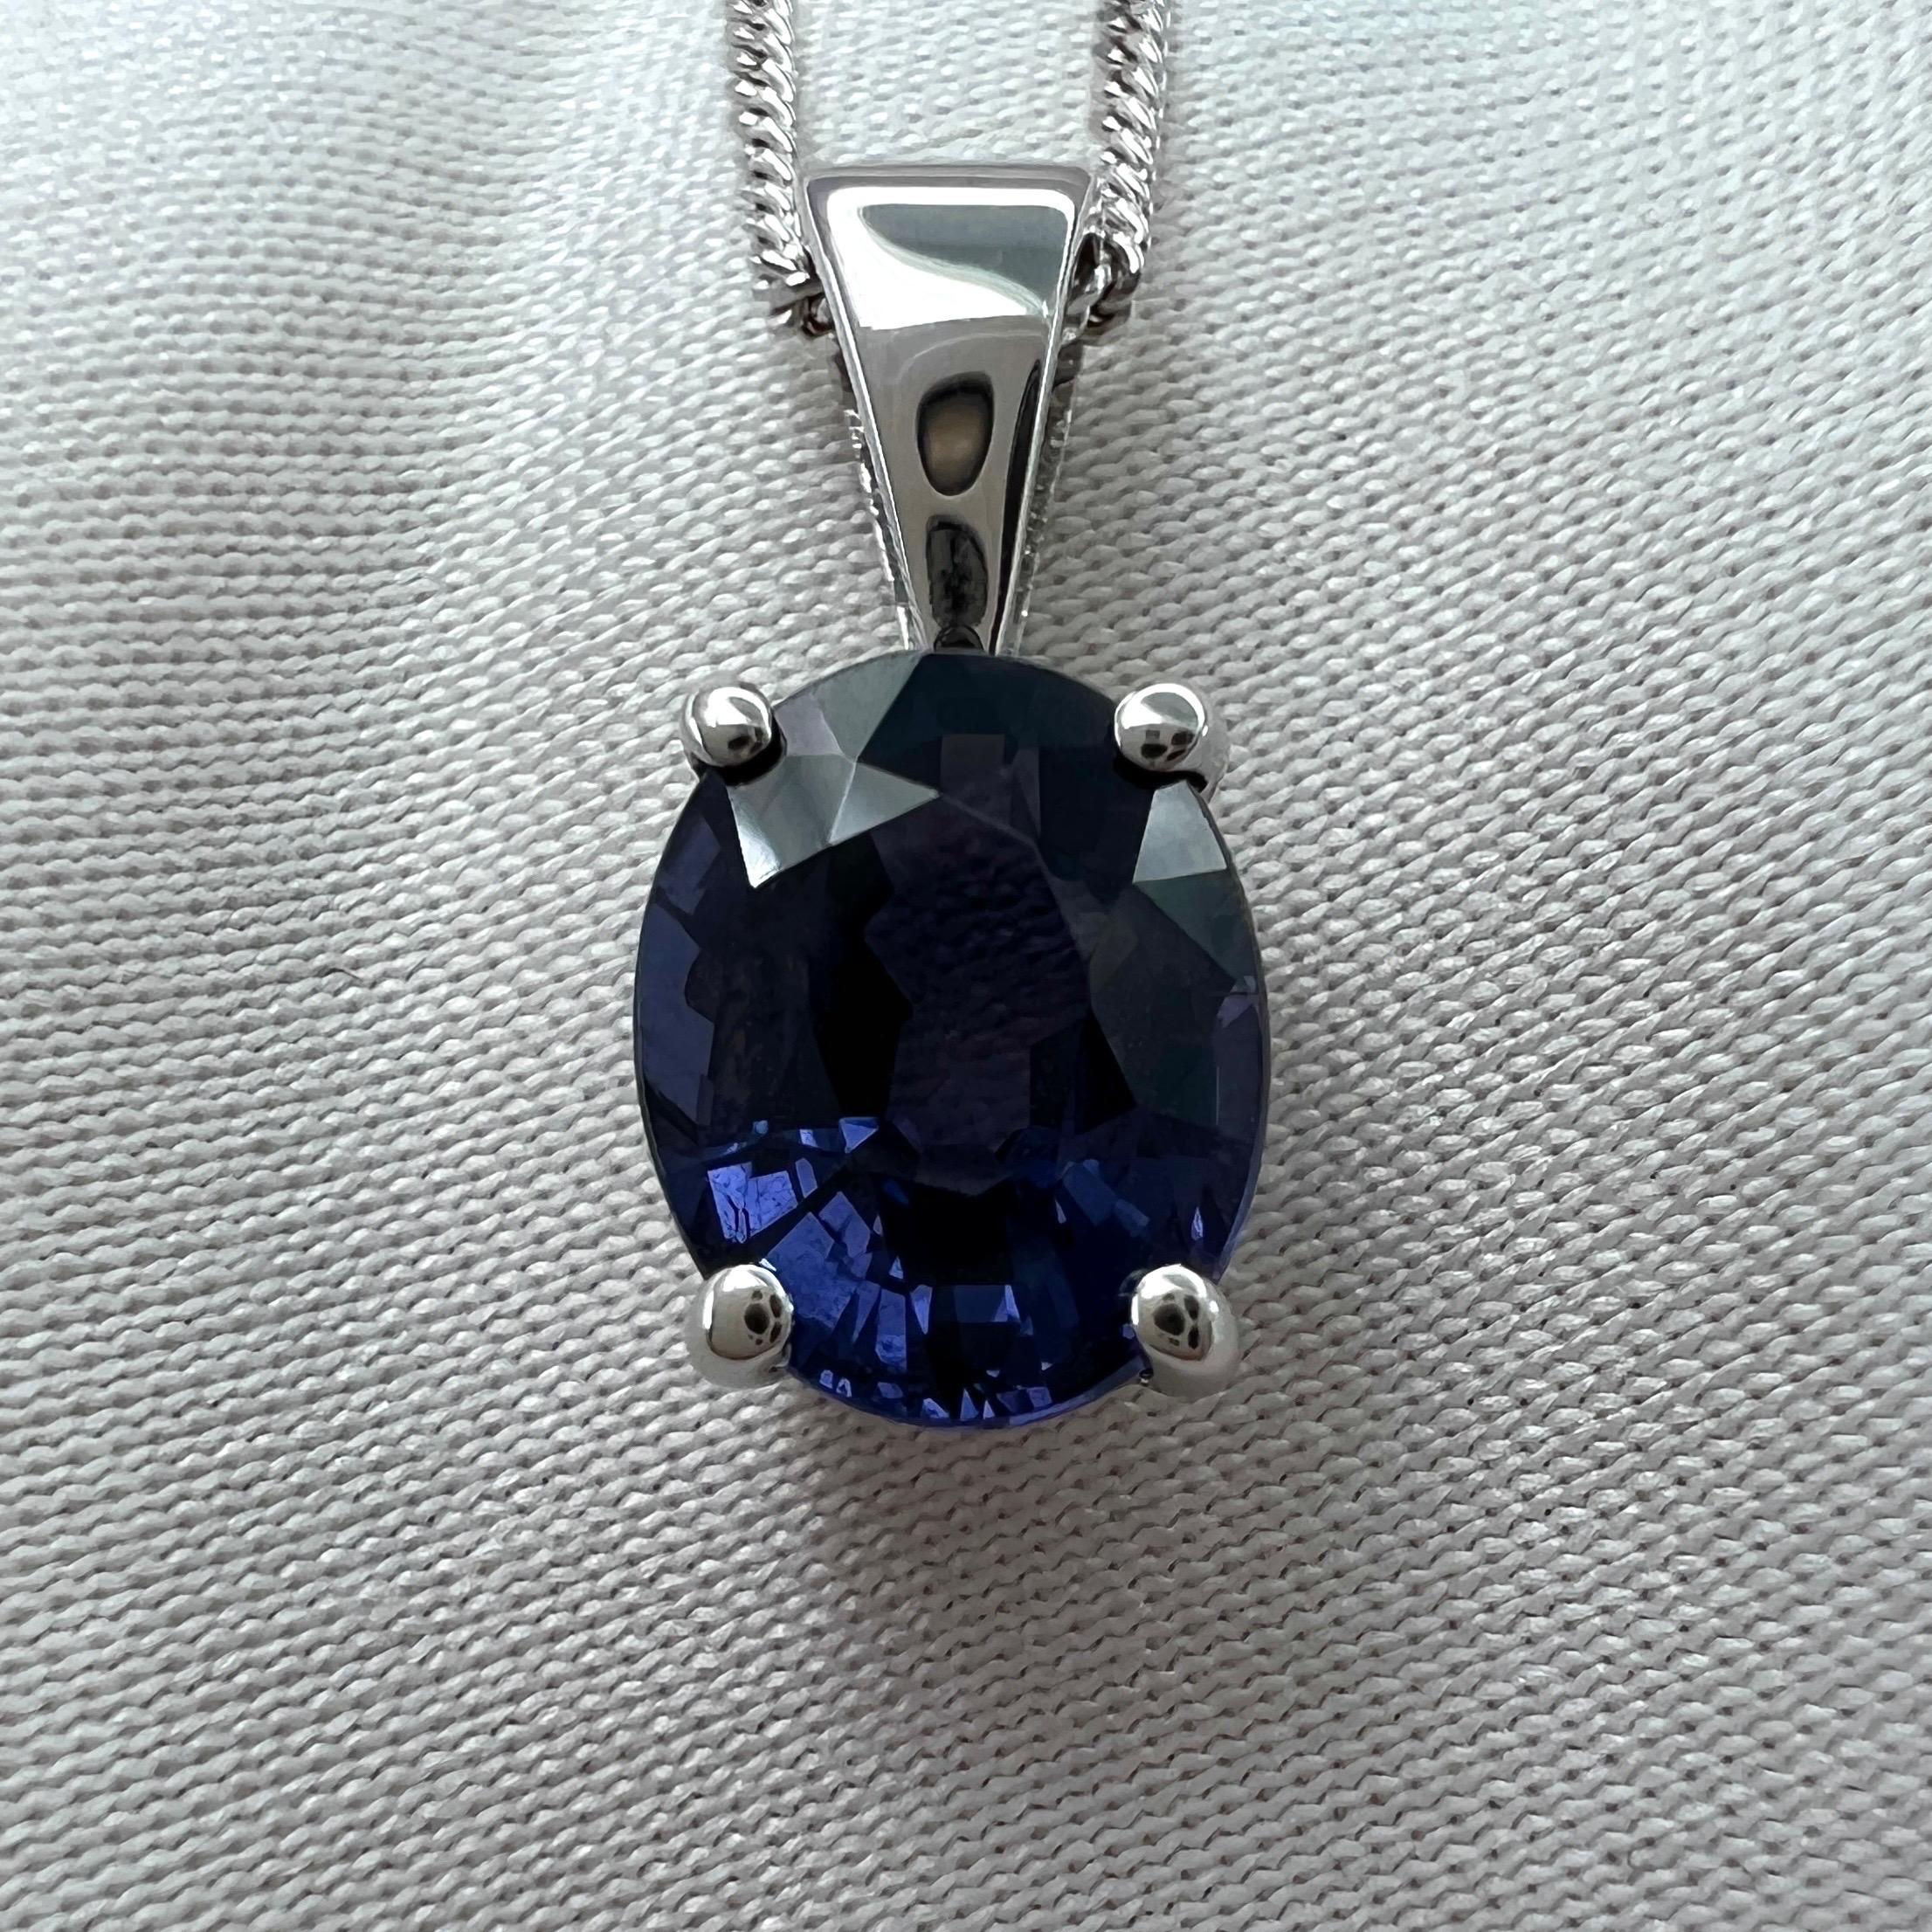 Vivid Purple Blue Spinel Oval Cut 18k White Gold Solitaire Pendant Necklace.

1.63 Carat spinel with a beautiful vivid blue purple colour. This spinel also has an excellent oval cut with very good clarity, a clean stone with only some small natural